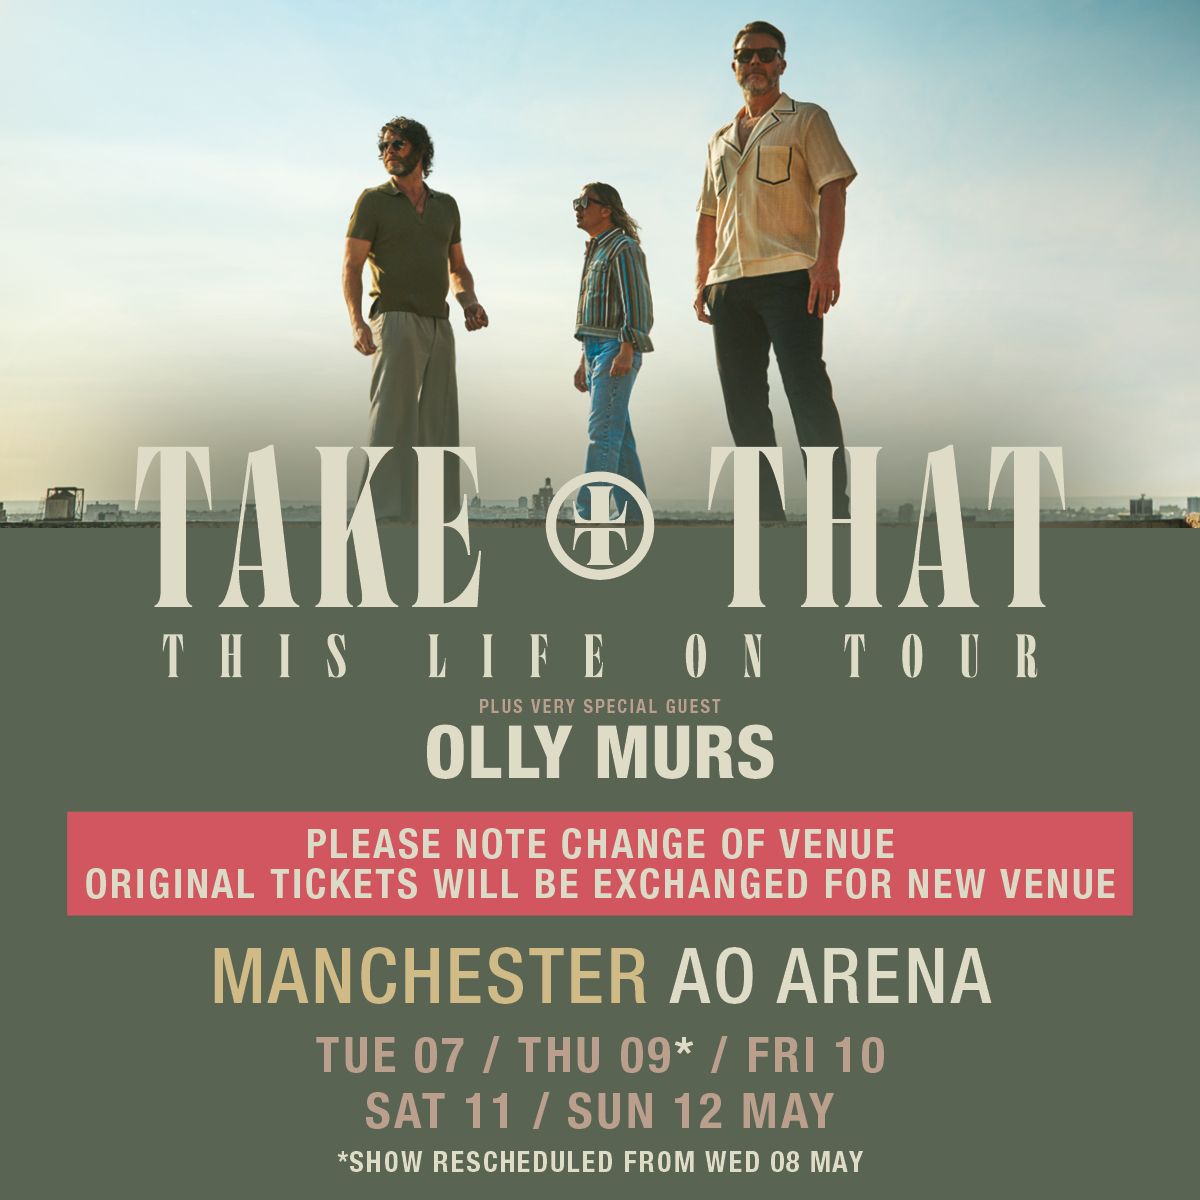 Take That Move May Manchester Shows To AO Arena - Stereoboard